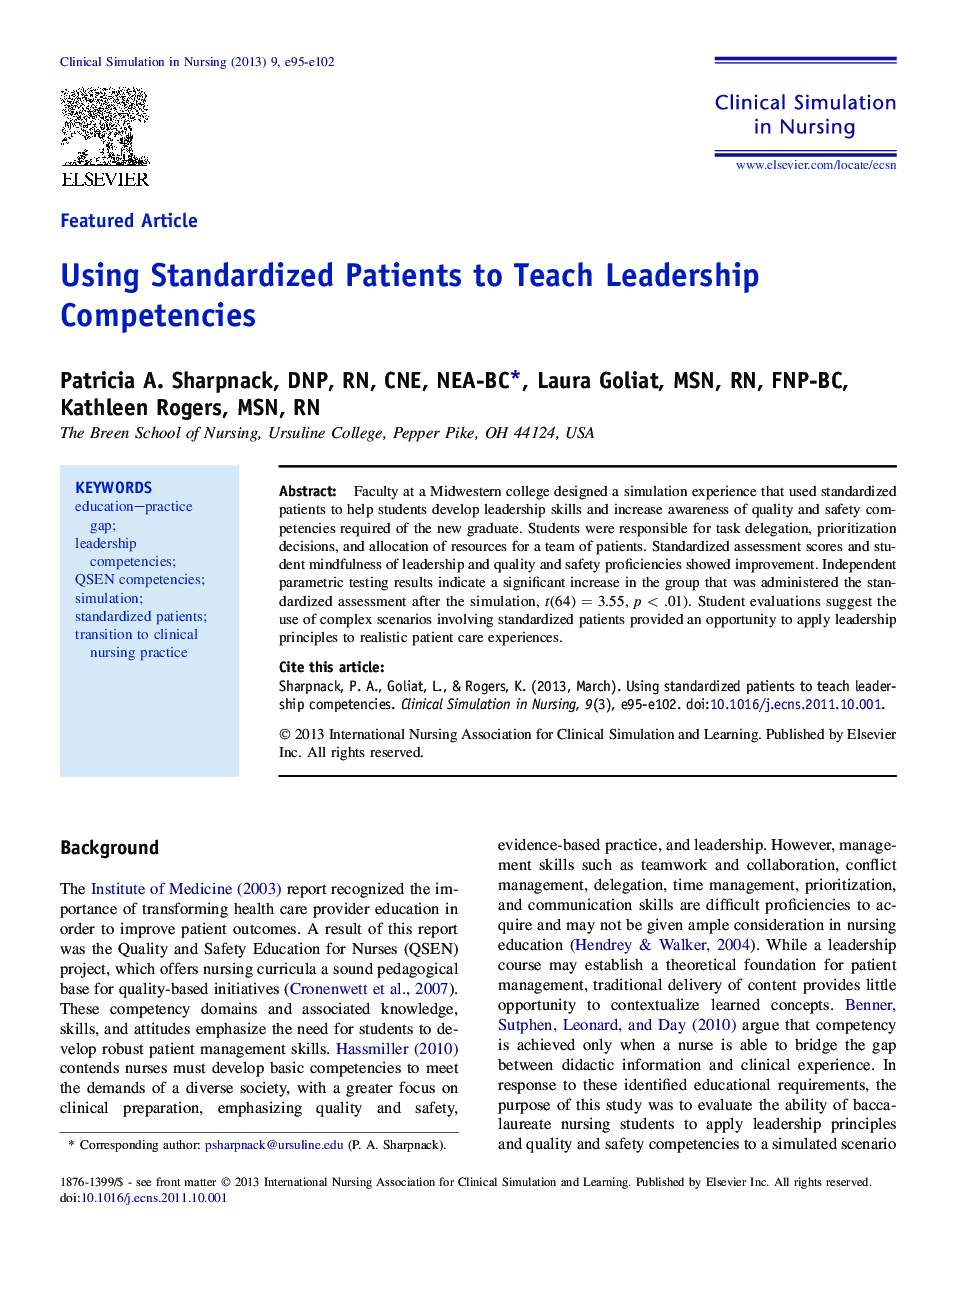 Using Standardized Patients to Teach Leadership Competencies